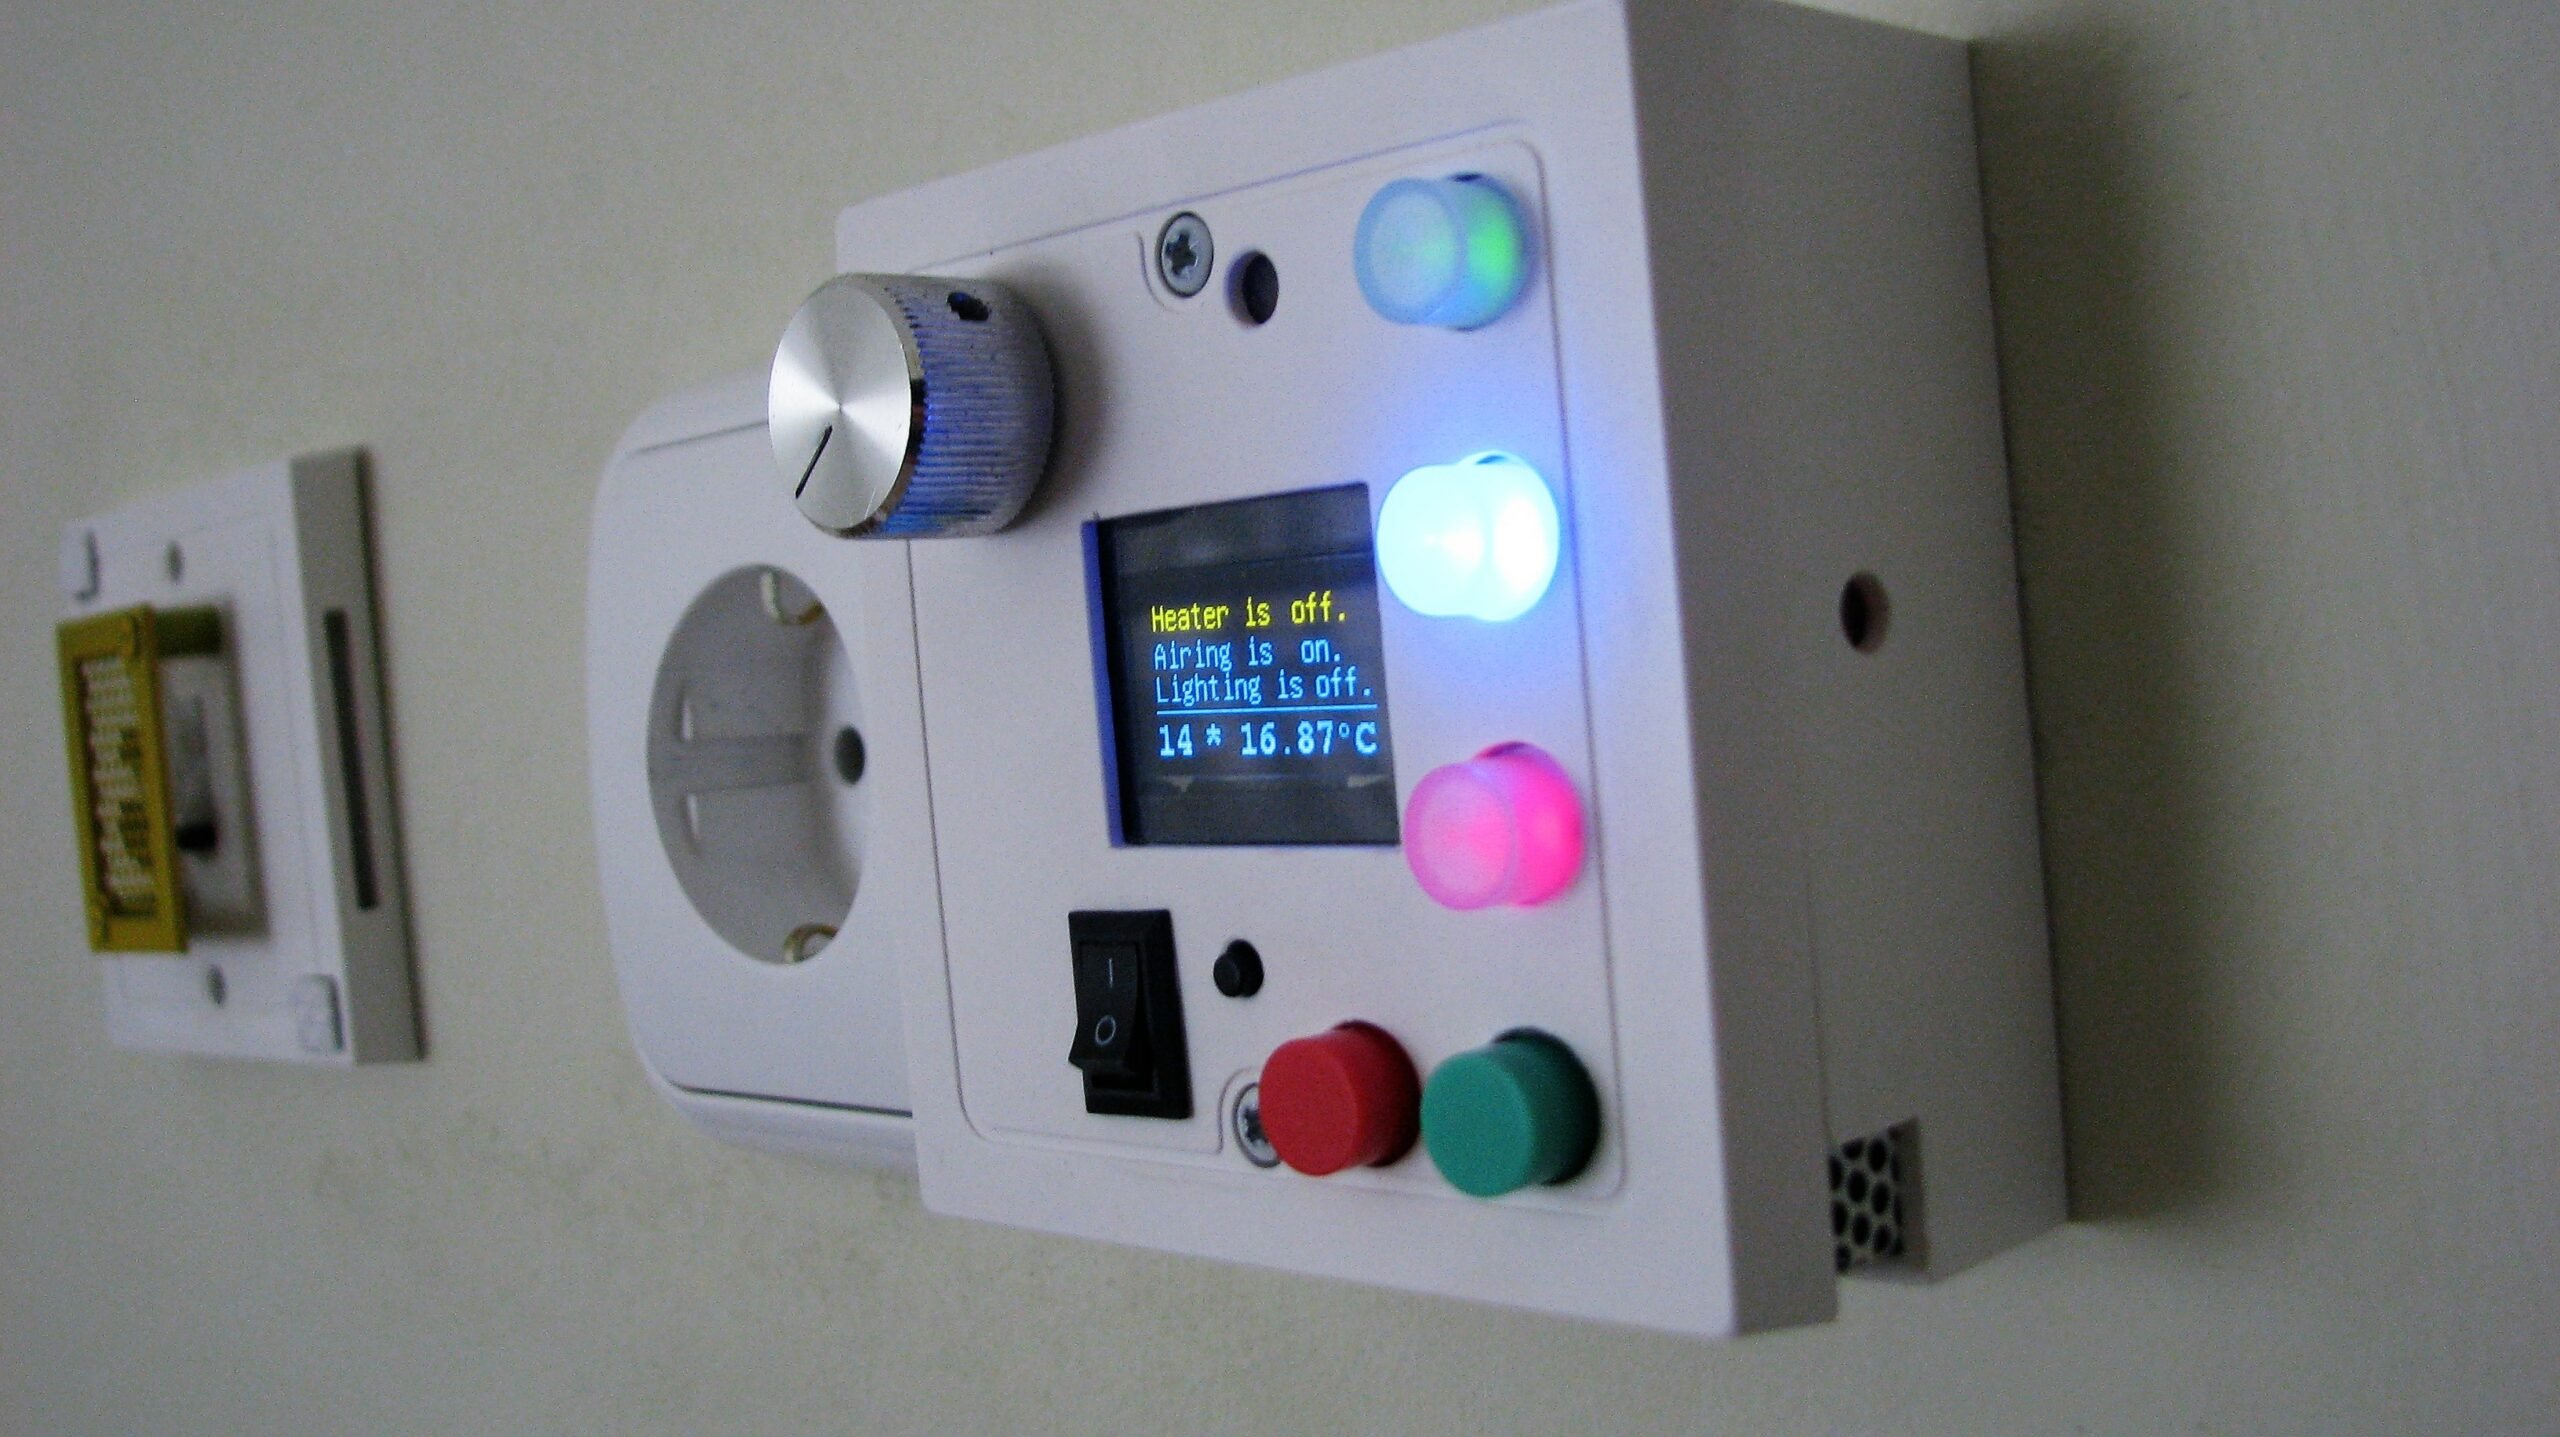 In-Home Display Add-On Sensor Example 